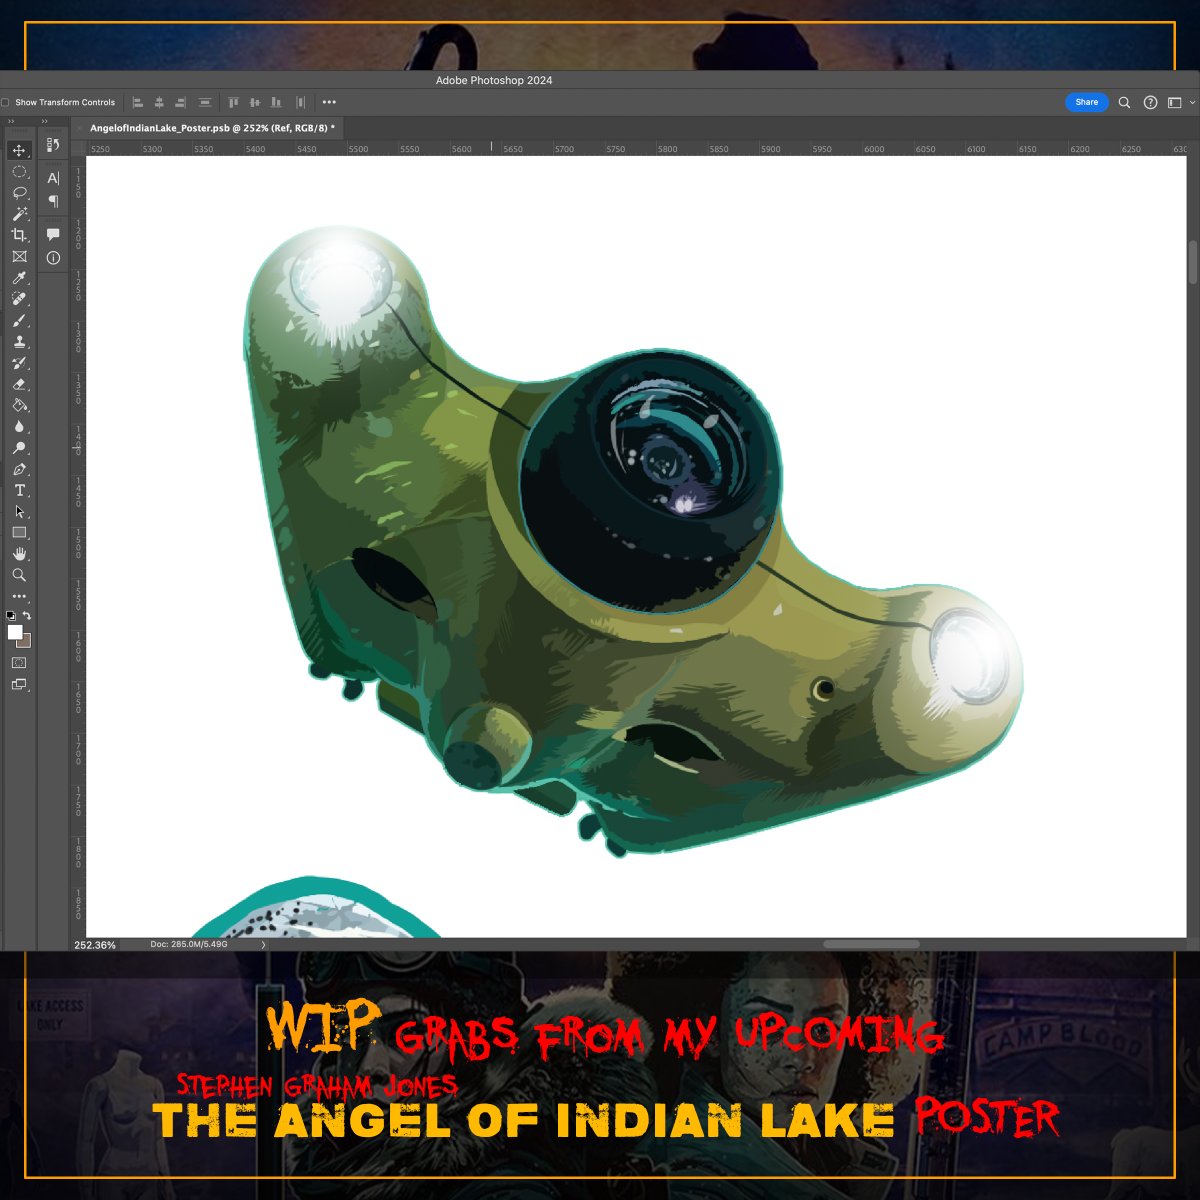 Here are some WIP in-progress screen grabs of pieces of my new #fanart #poster for @SGJ72 's masterpiece #theangelofindianlake from his #indianlaketrilogy 🔥❤️🔥 can’t wait to share the completed full version 🤘🏻 #jadedanielsismyfinalgirl